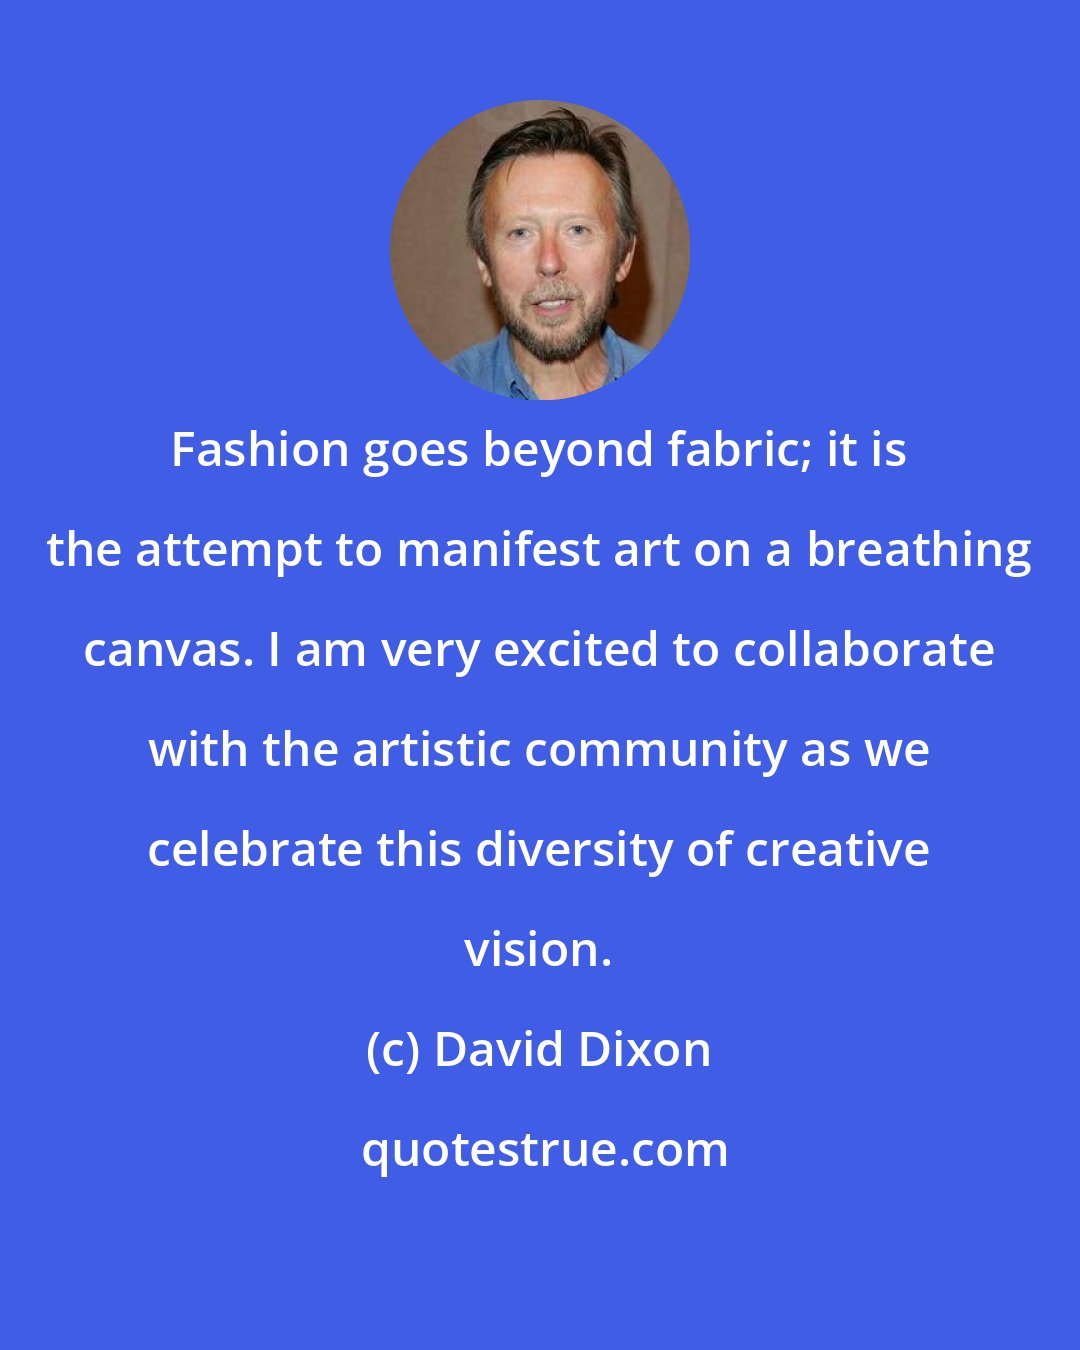 David Dixon: Fashion goes beyond fabric; it is the attempt to manifest art on a breathing canvas. I am very excited to collaborate with the artistic community as we celebrate this diversity of creative vision.